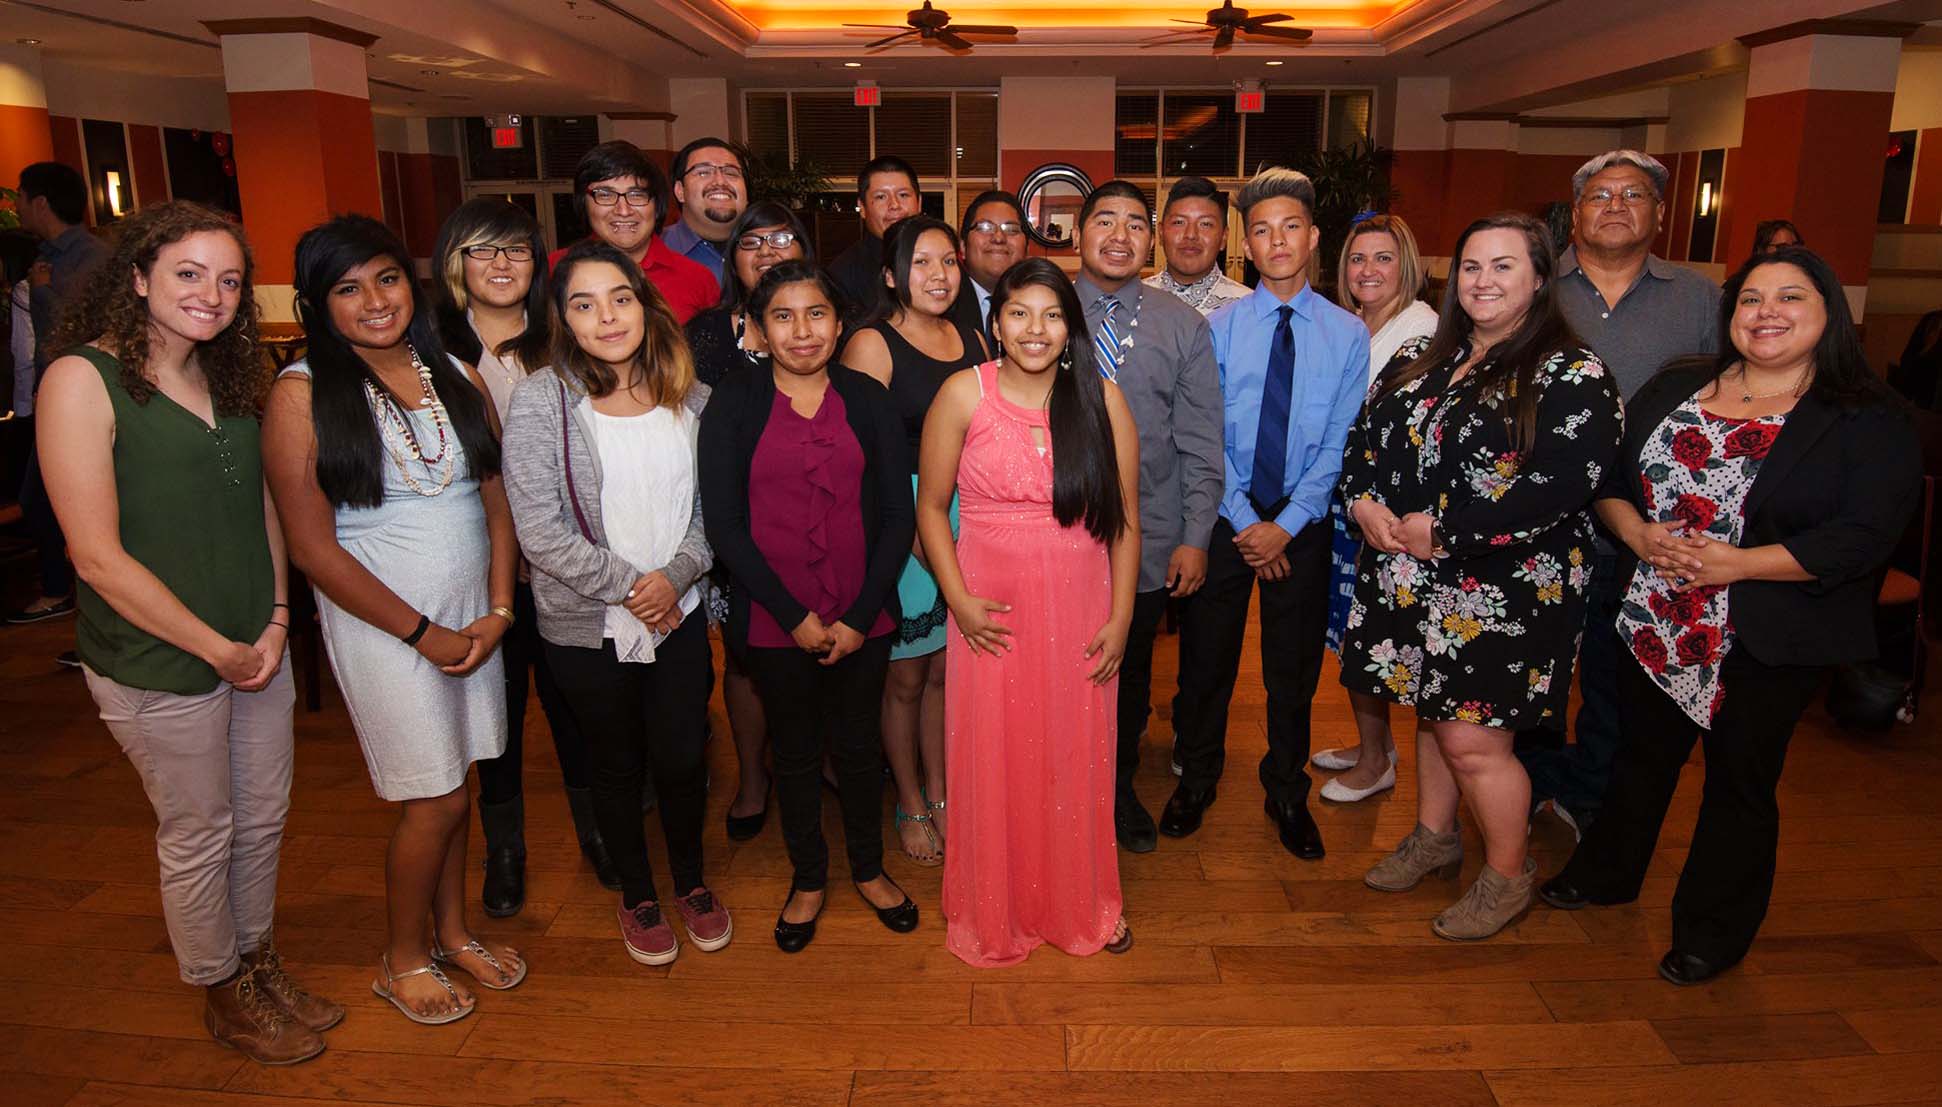 Students and staff from the S.T.A.R.T. Program attending the 2017 ASU Cultural Professionalism Etiquette Dinner posed for a group photo.